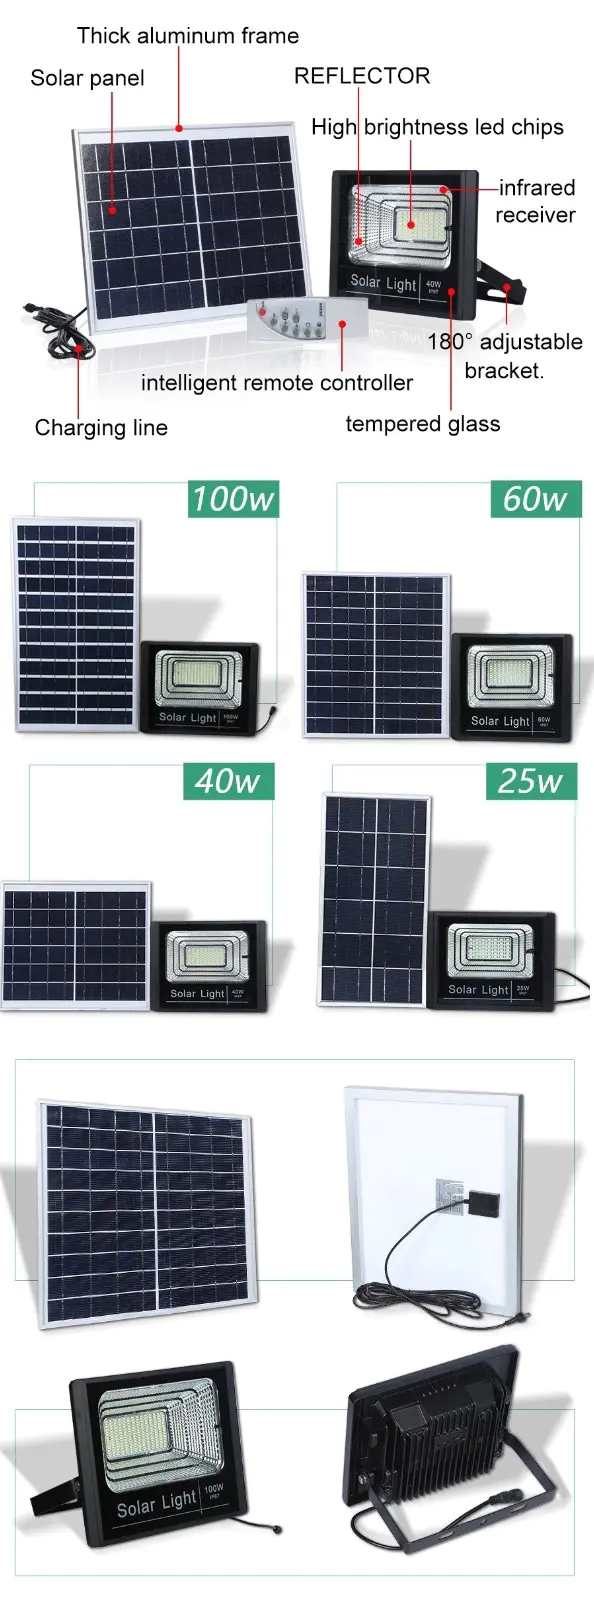 Litel Technology competitive price solar powered flood lights inquire now for workshop